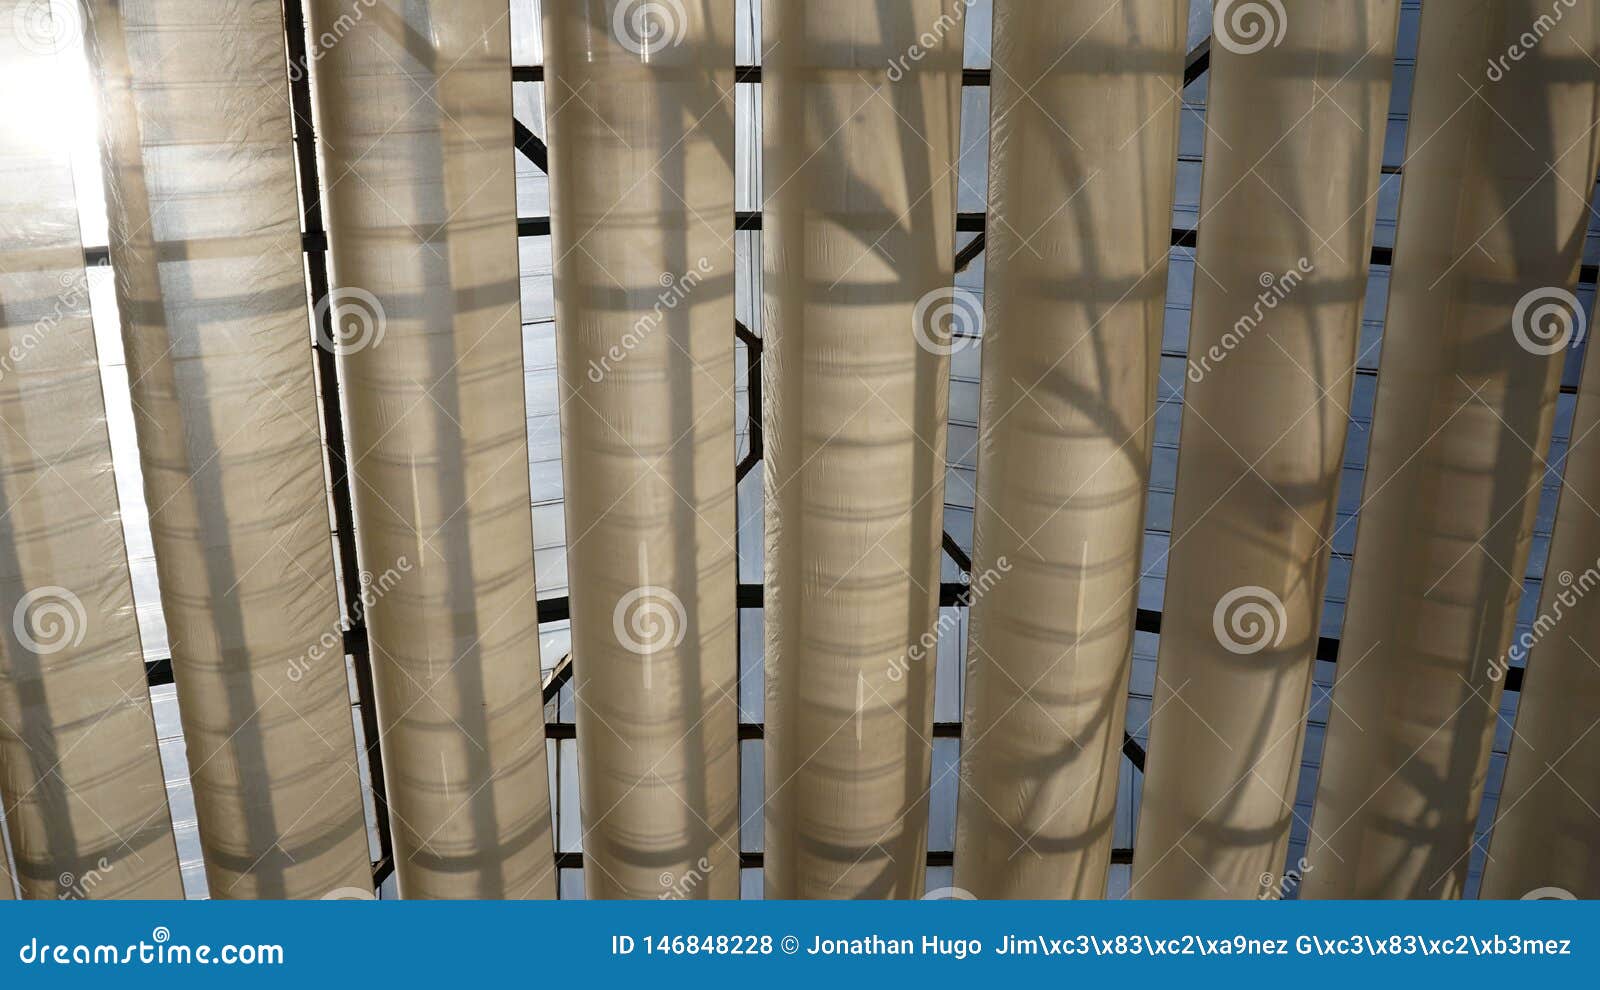 Fabric Hanging Tubes Stock Photo Image Of Long Vertical 146848228